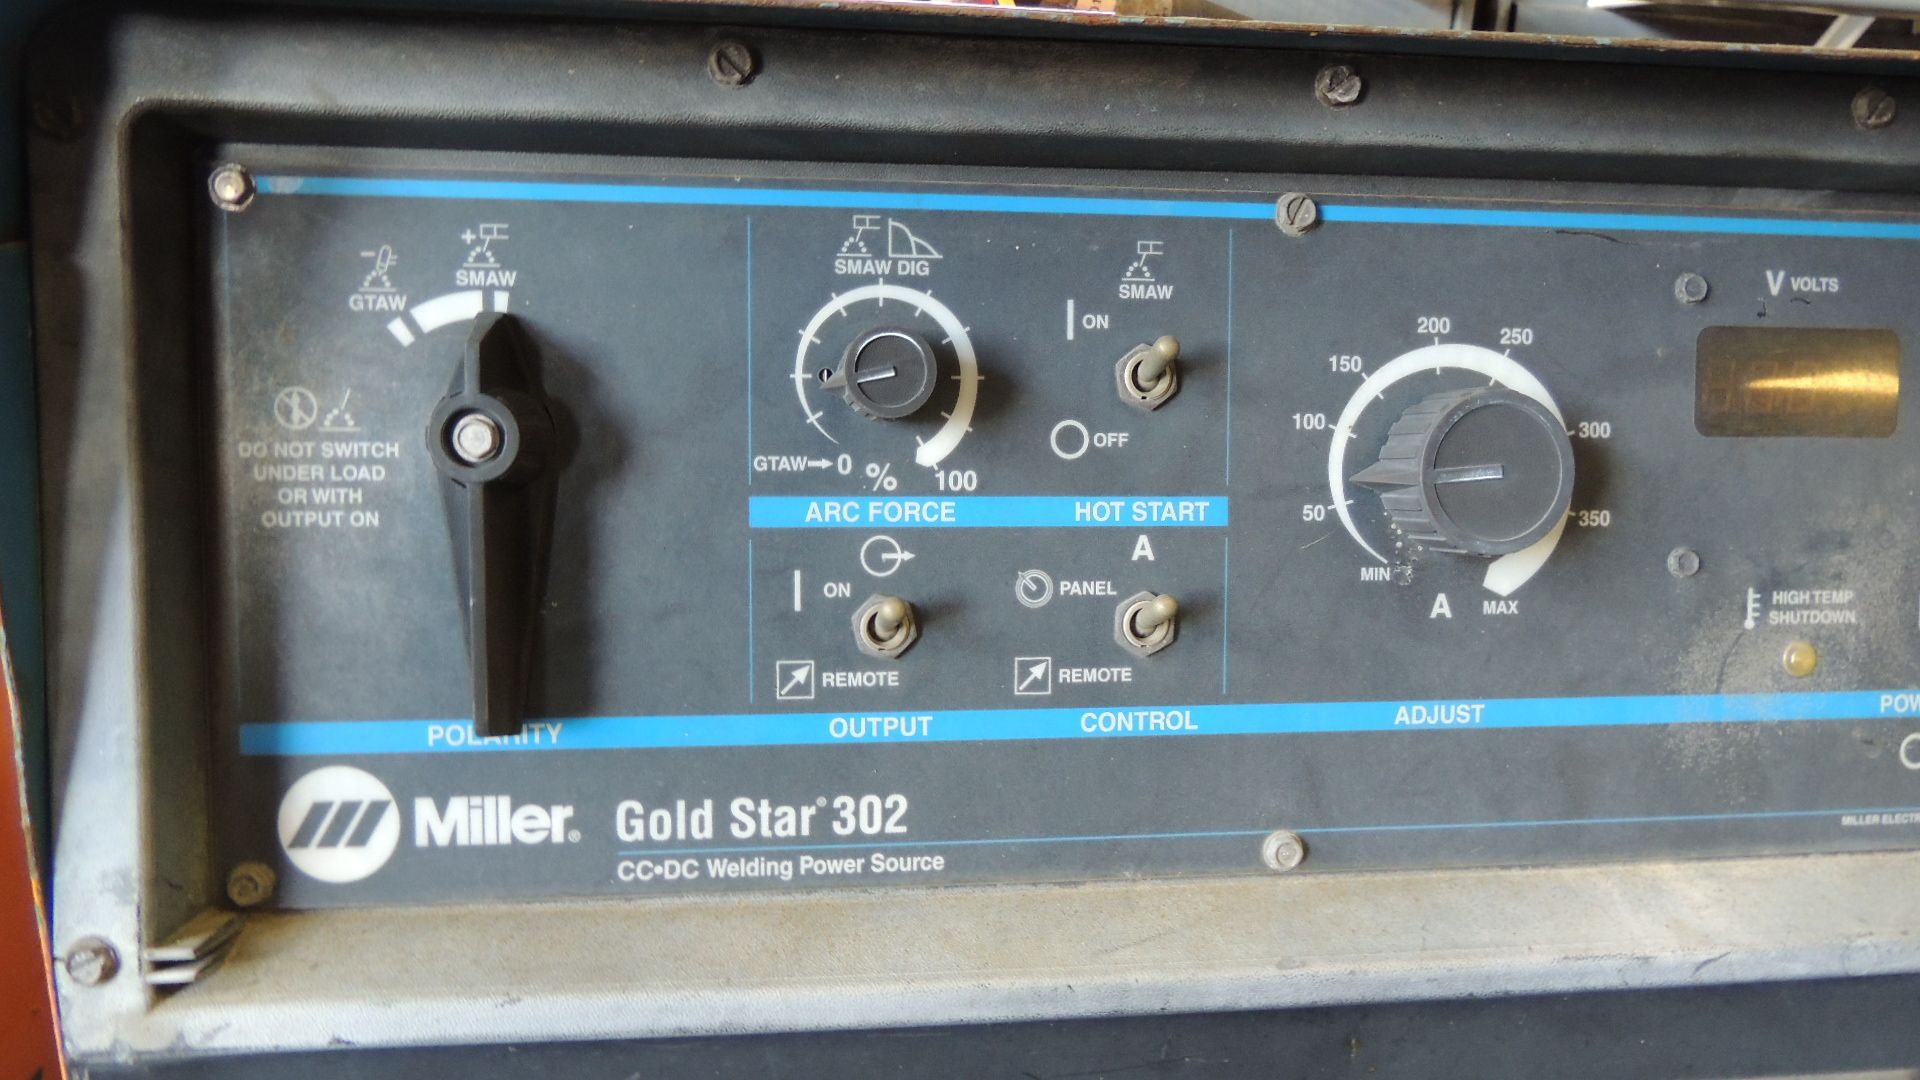 Welder. Miller Gold Star 302 CC.DC welding power source, on casters, volts and amps digital readout, - Image 3 of 4